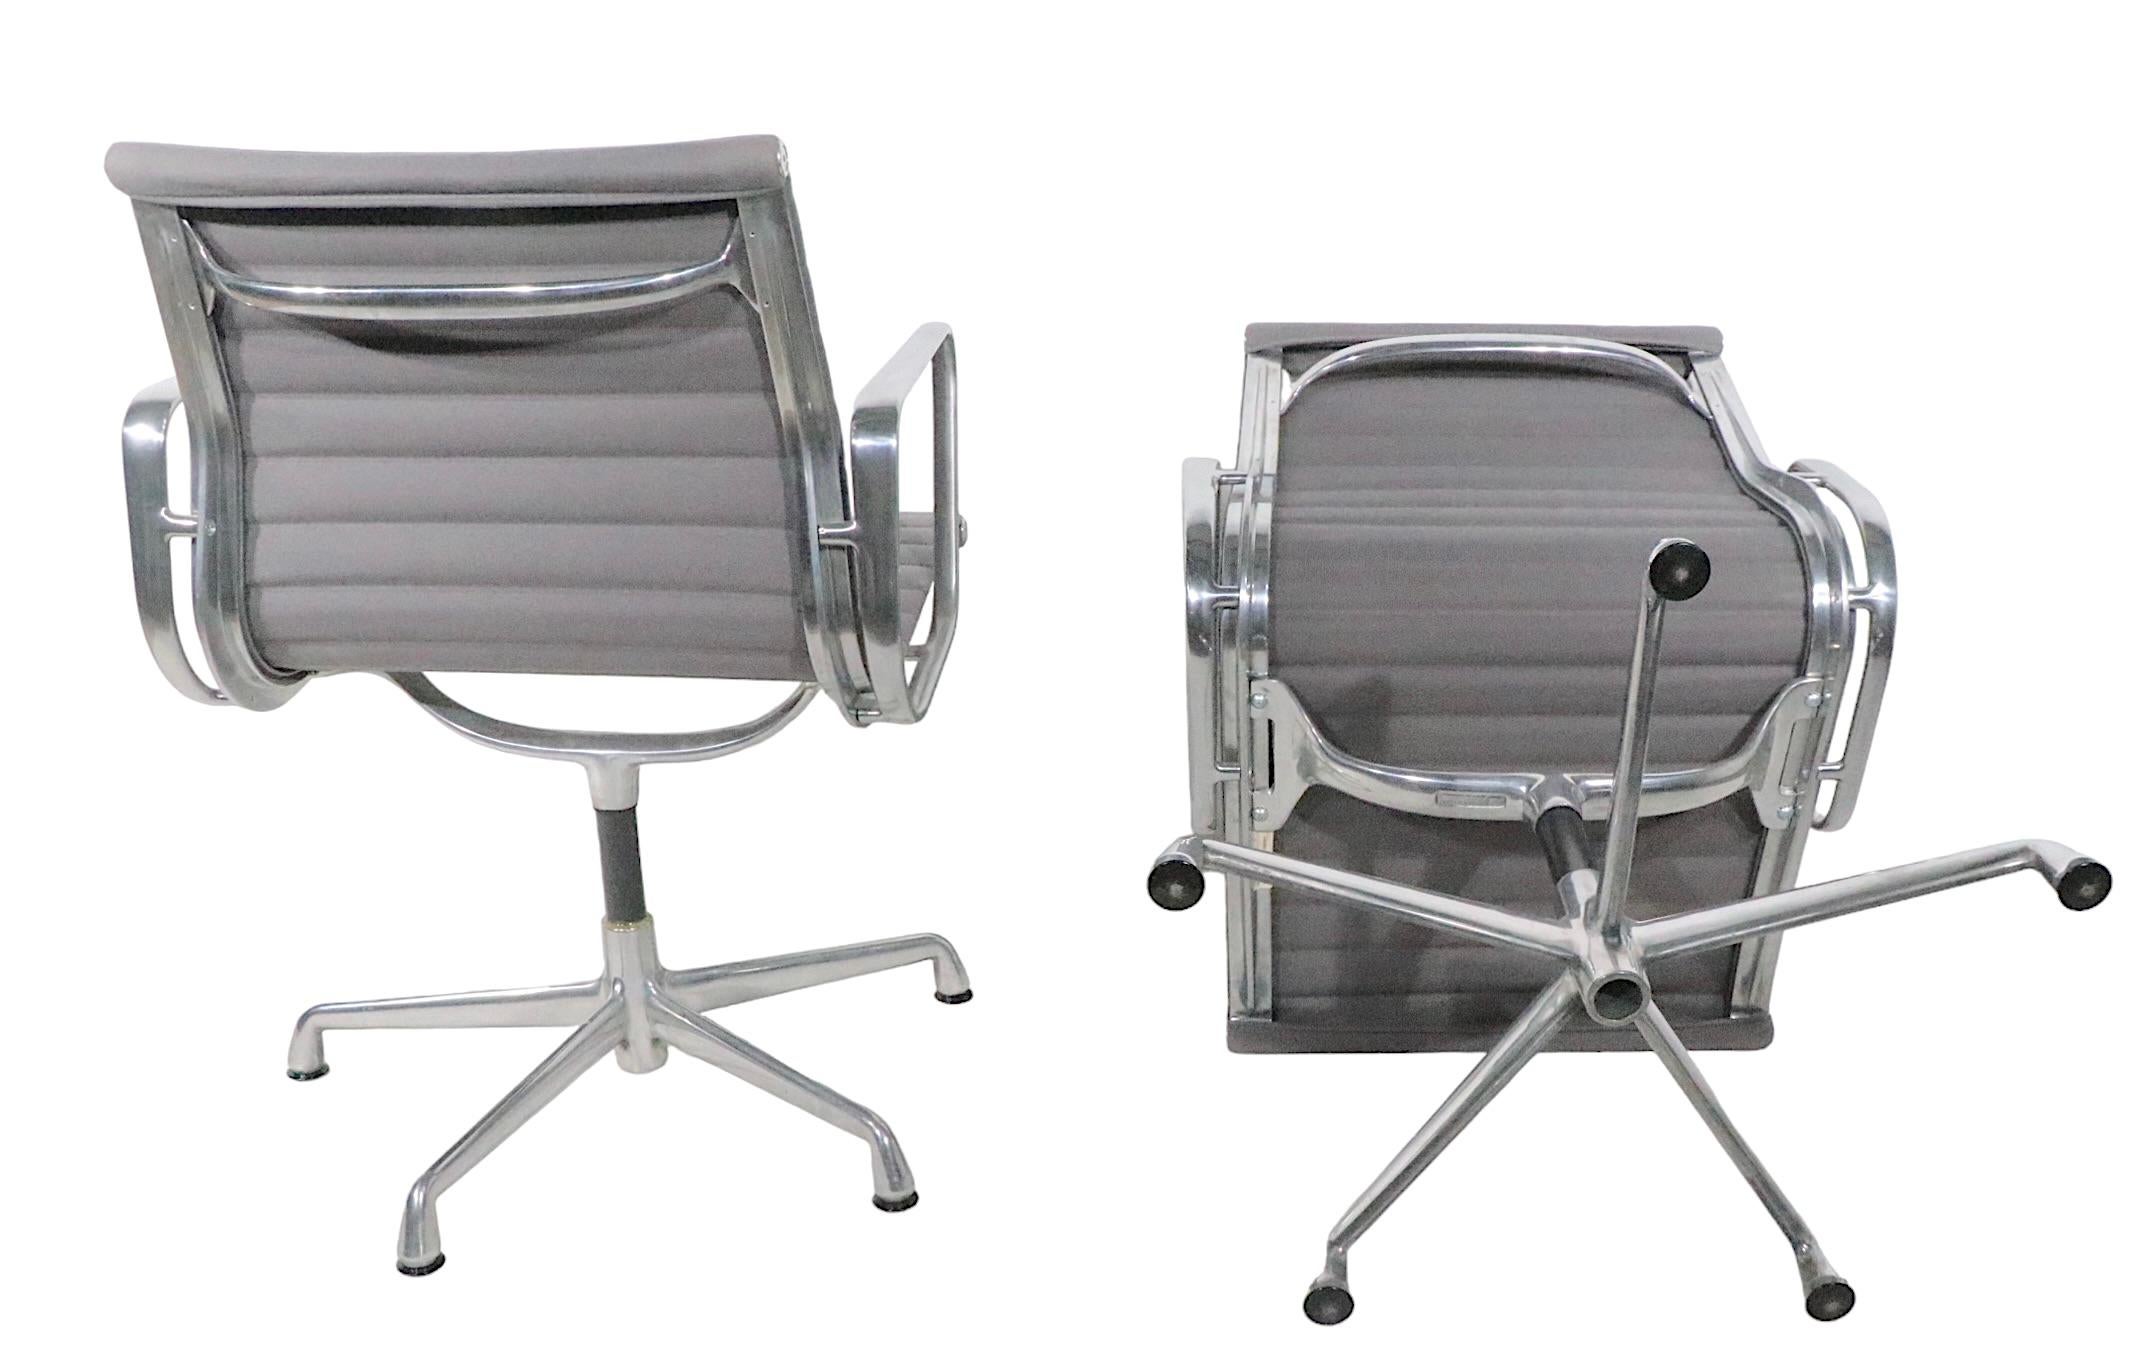 Sharp set of 4 Eames aluminum group management chairs in gray fabric, with cast aluminum frames. The chairs are all in great, original, clean and ready to use condition, all are marked Herman Miller on verso. We have priced and are offering them